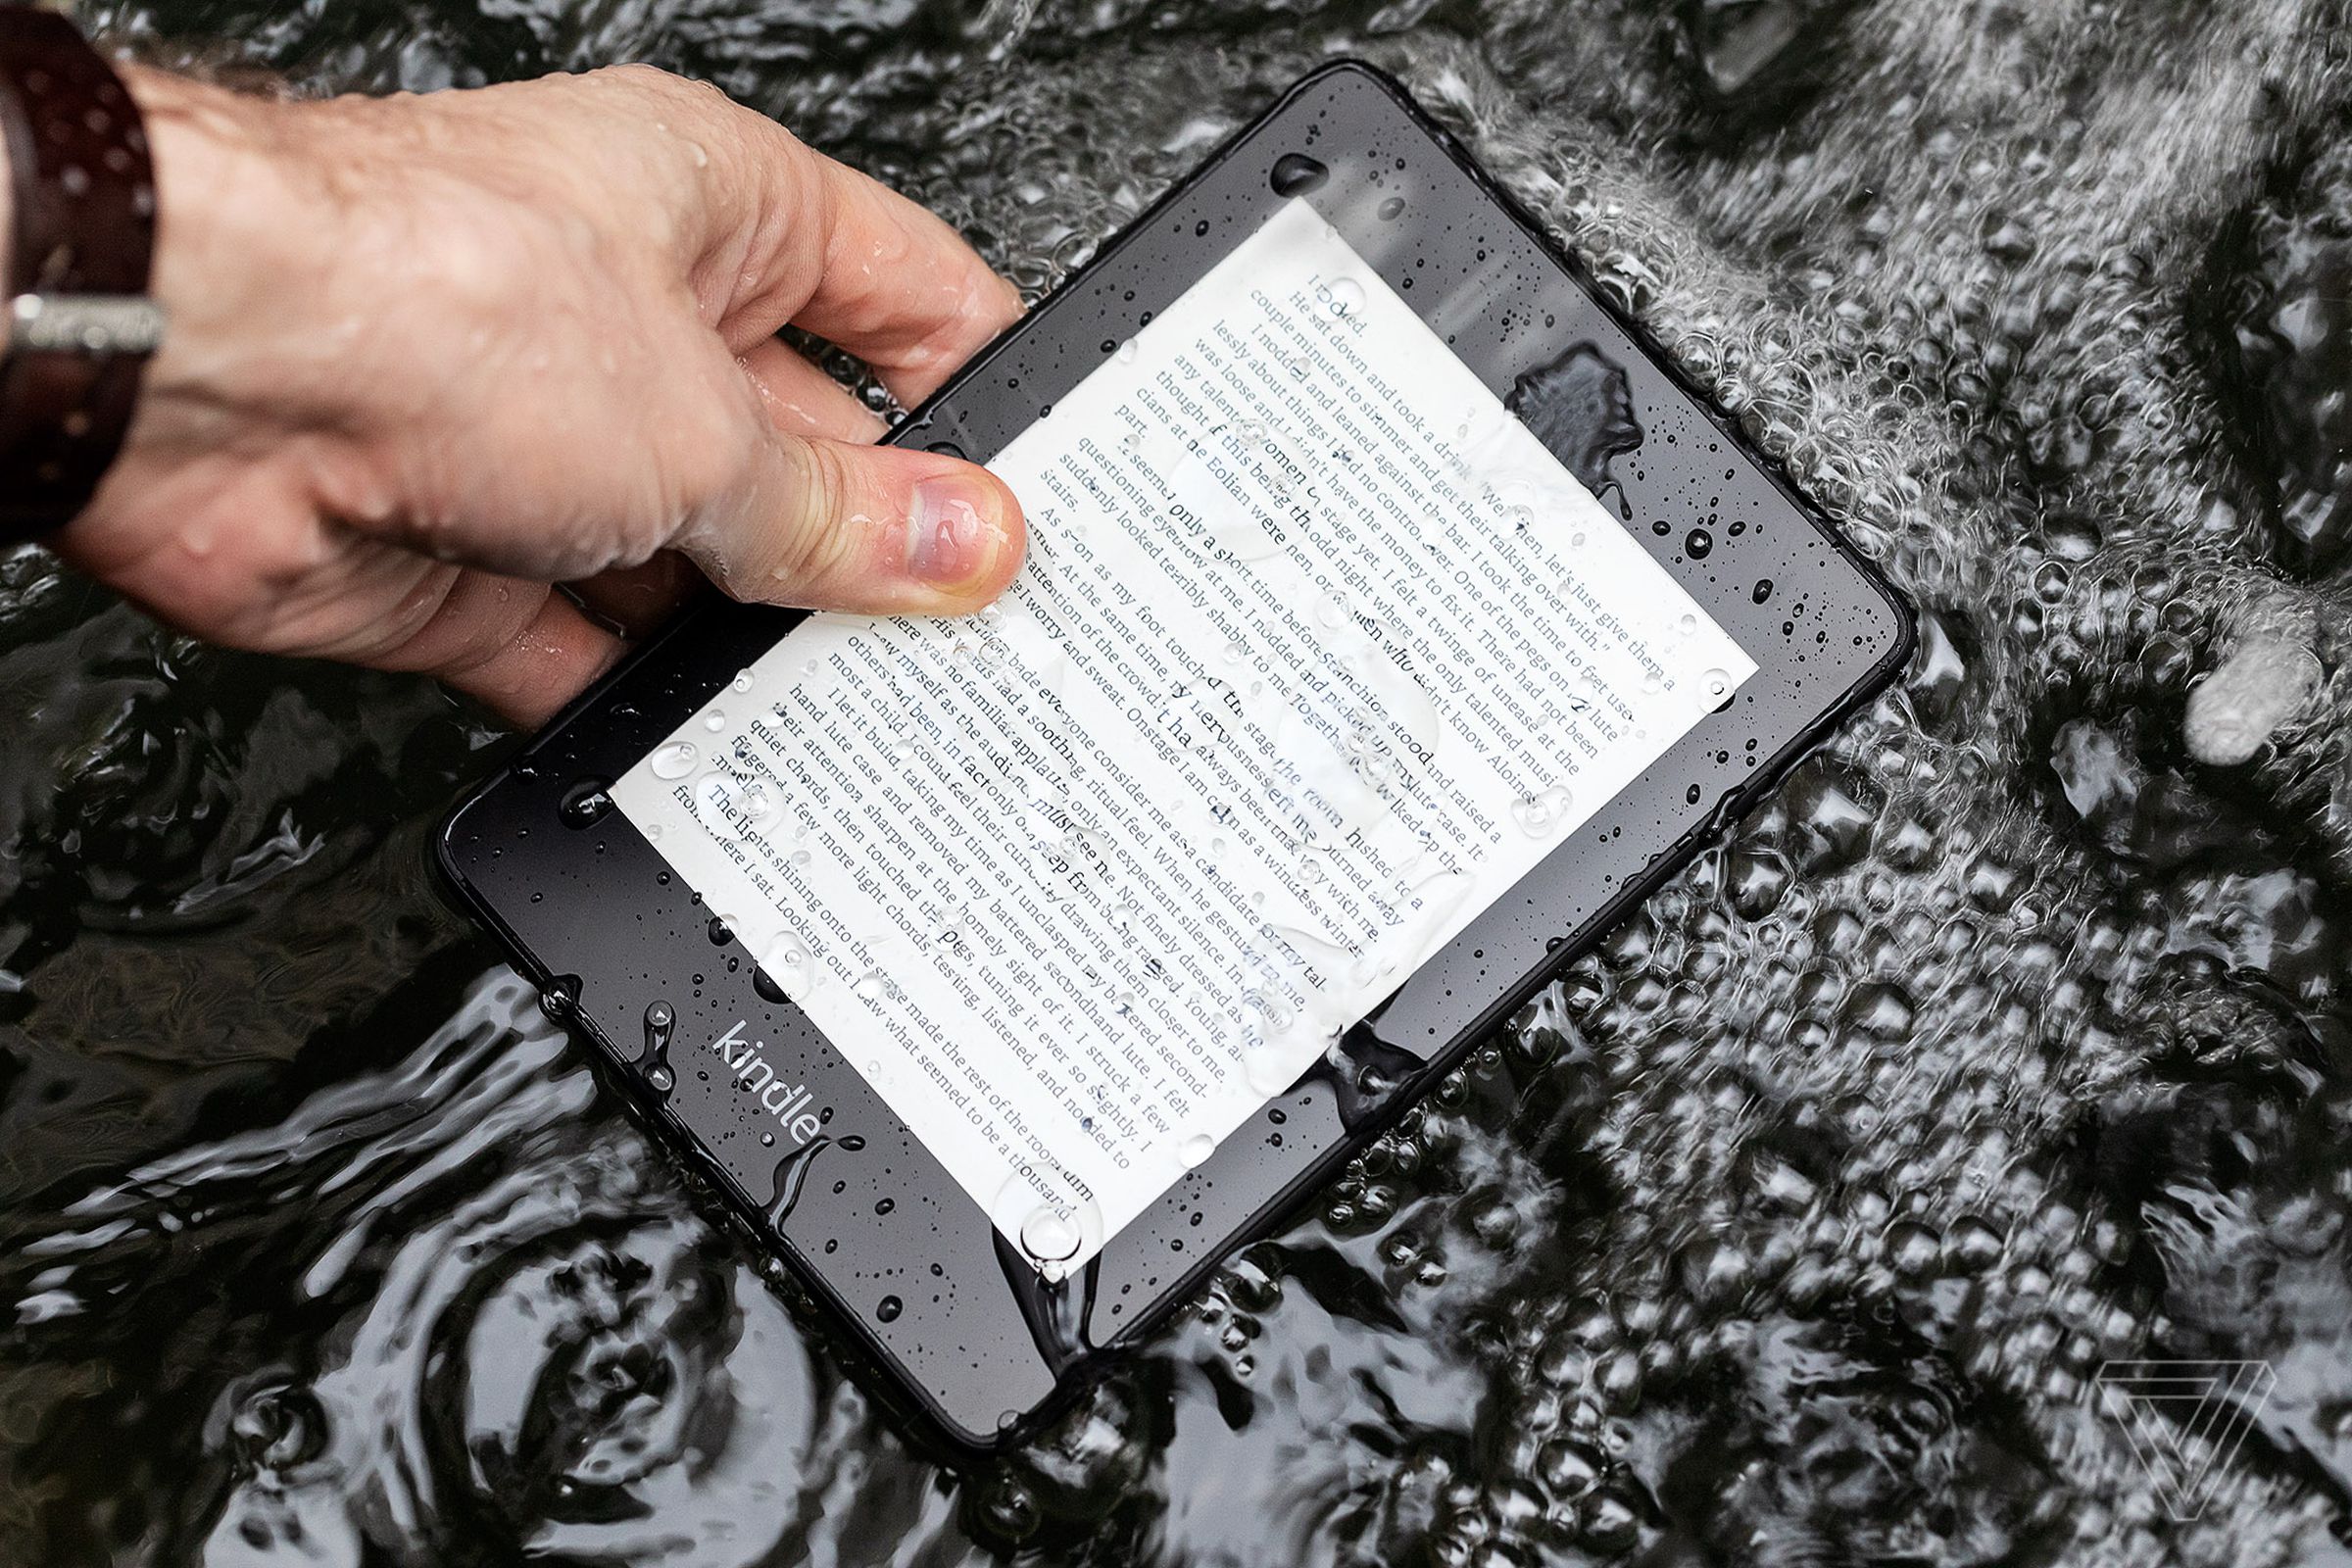 Amazon’s last Kindle Paperwhite, released in 2018.